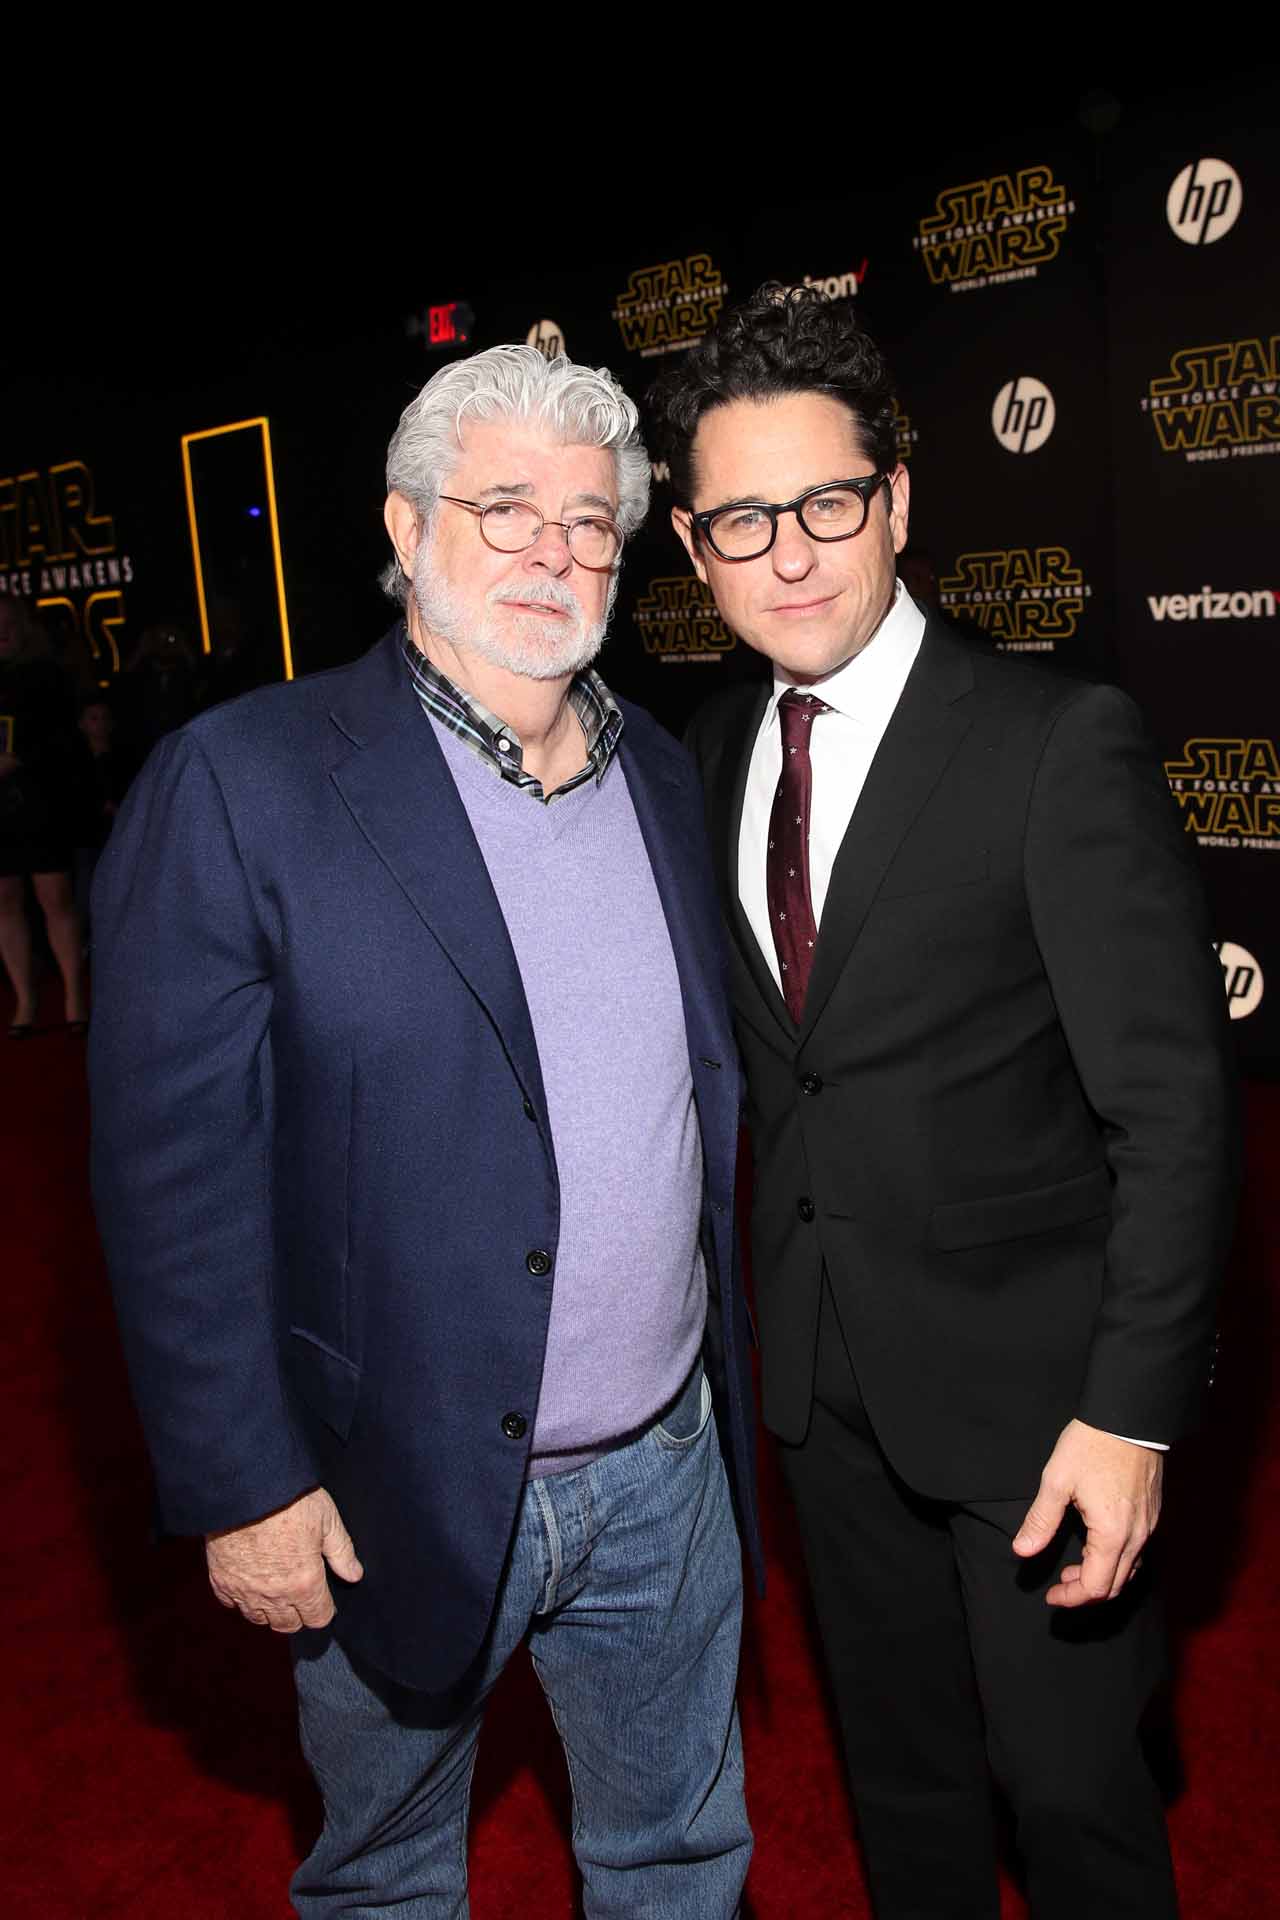 HOLLYWOOD, CA - DECEMBER 14:  Directors George Lucas (L) and J.J. Abrams attend the World Premiere of ?Star Wars: The Force Awakens? at the Dolby, El Capitan, and TCL Theatres on December 14, 2015 in Hollywood, California.  (Photo by Jesse Grant/Getty Images for Disney) *** Local Caption *** J.J. Abrams;George Lucas